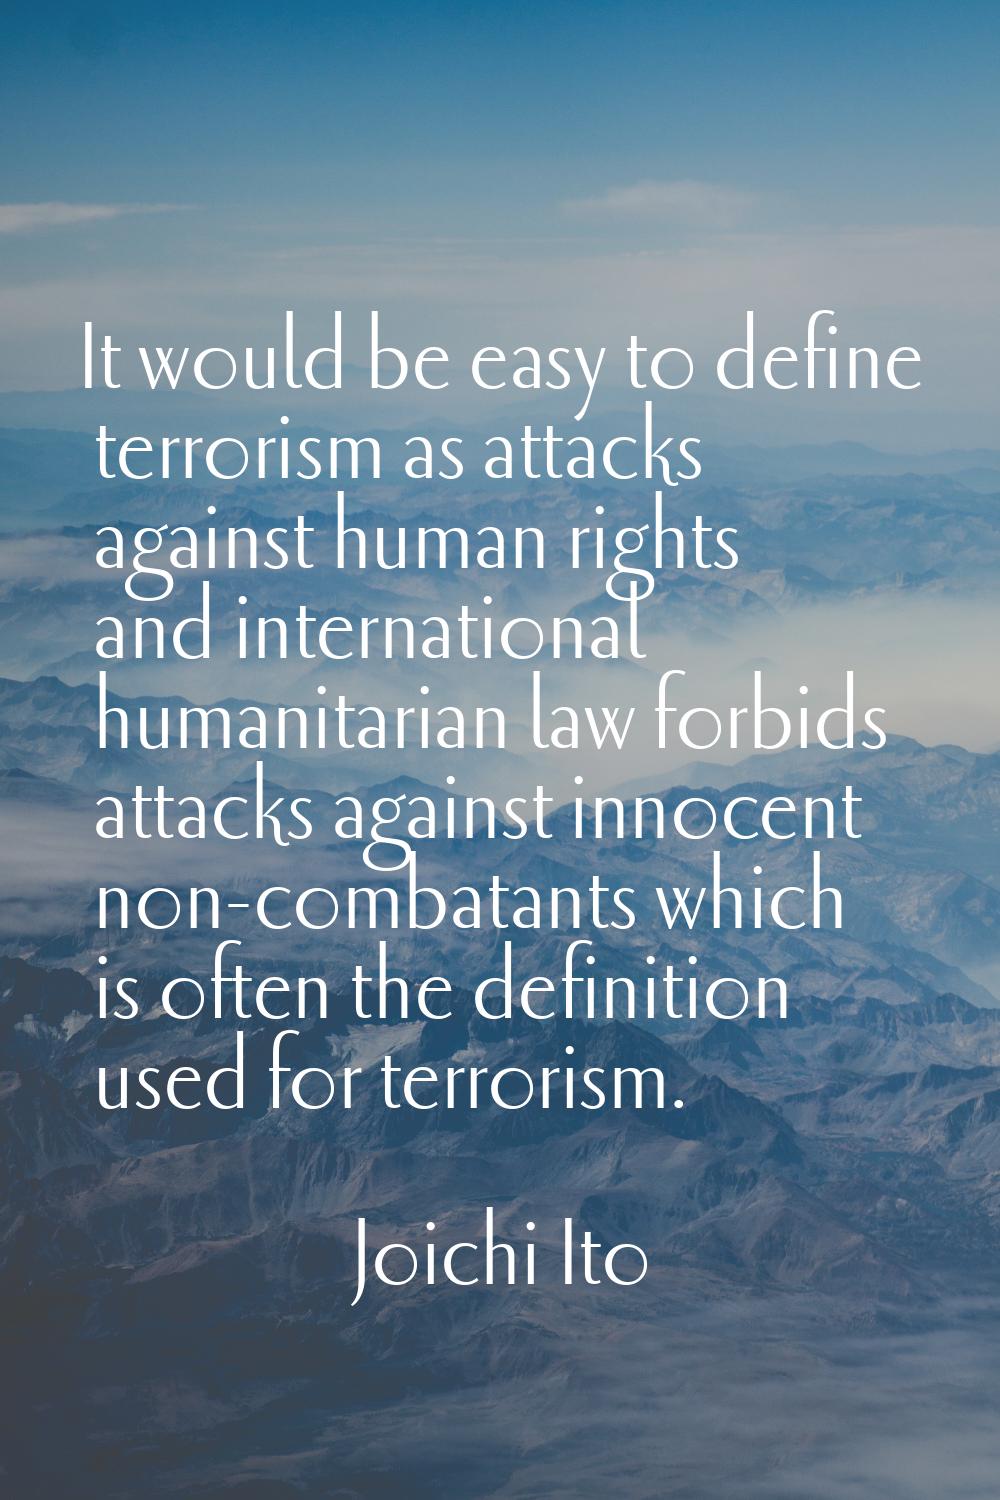 It would be easy to define terrorism as attacks against human rights and international humanitarian